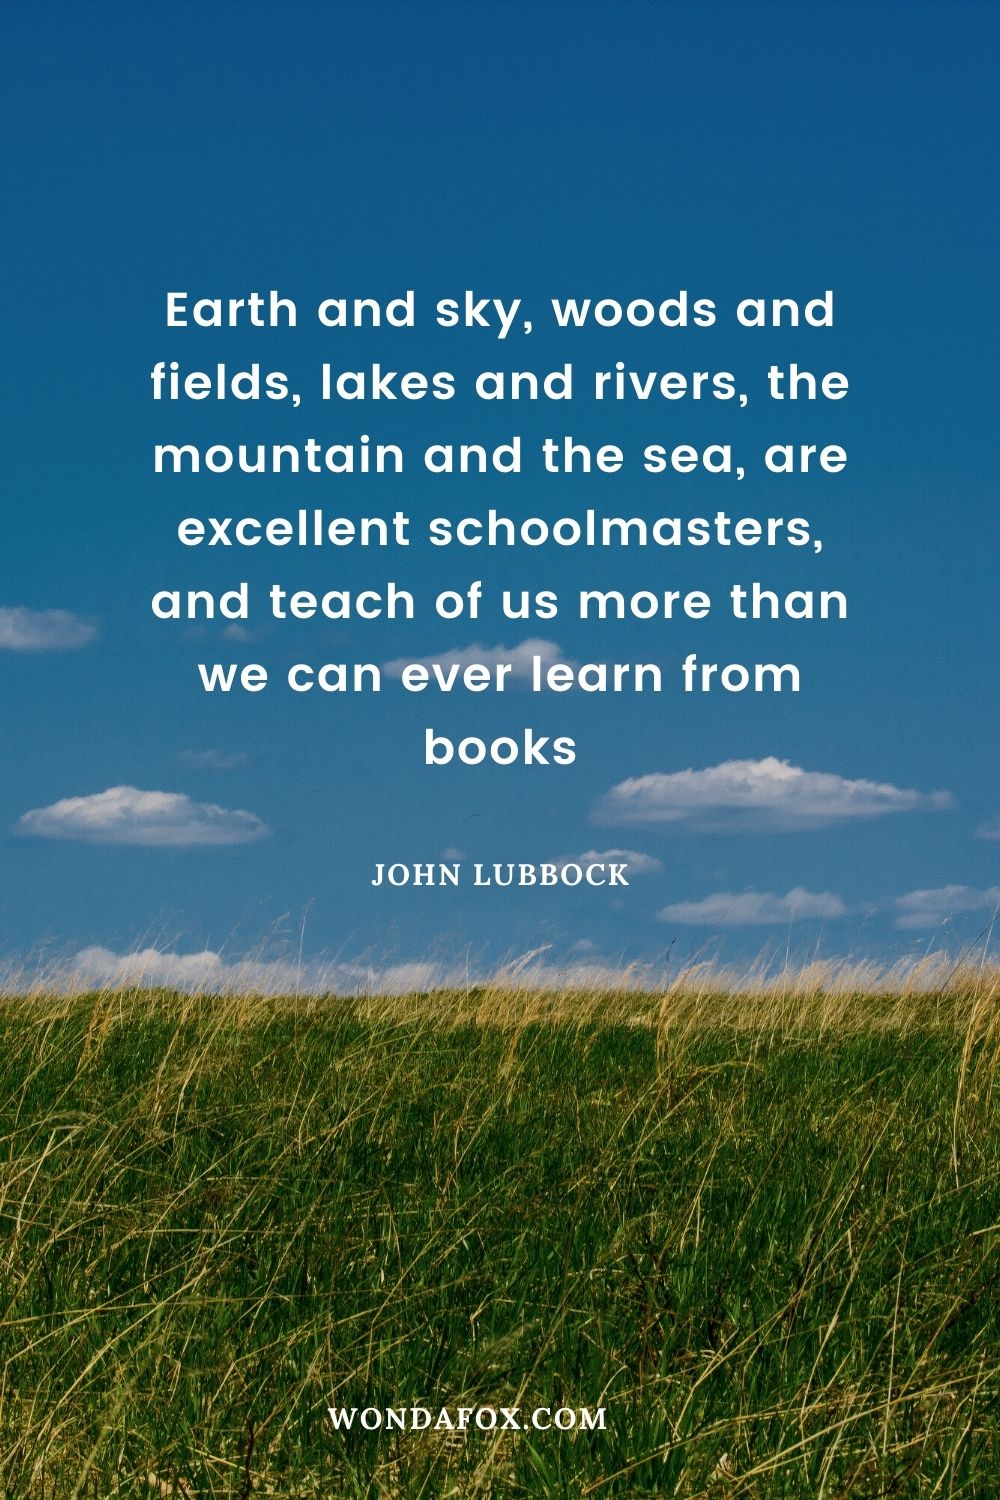 Earth and sky, woods and fields, lakes and rivers, the mountain and the sea, are excellent schoolmasters, and teach of us more than we can ever learn from books